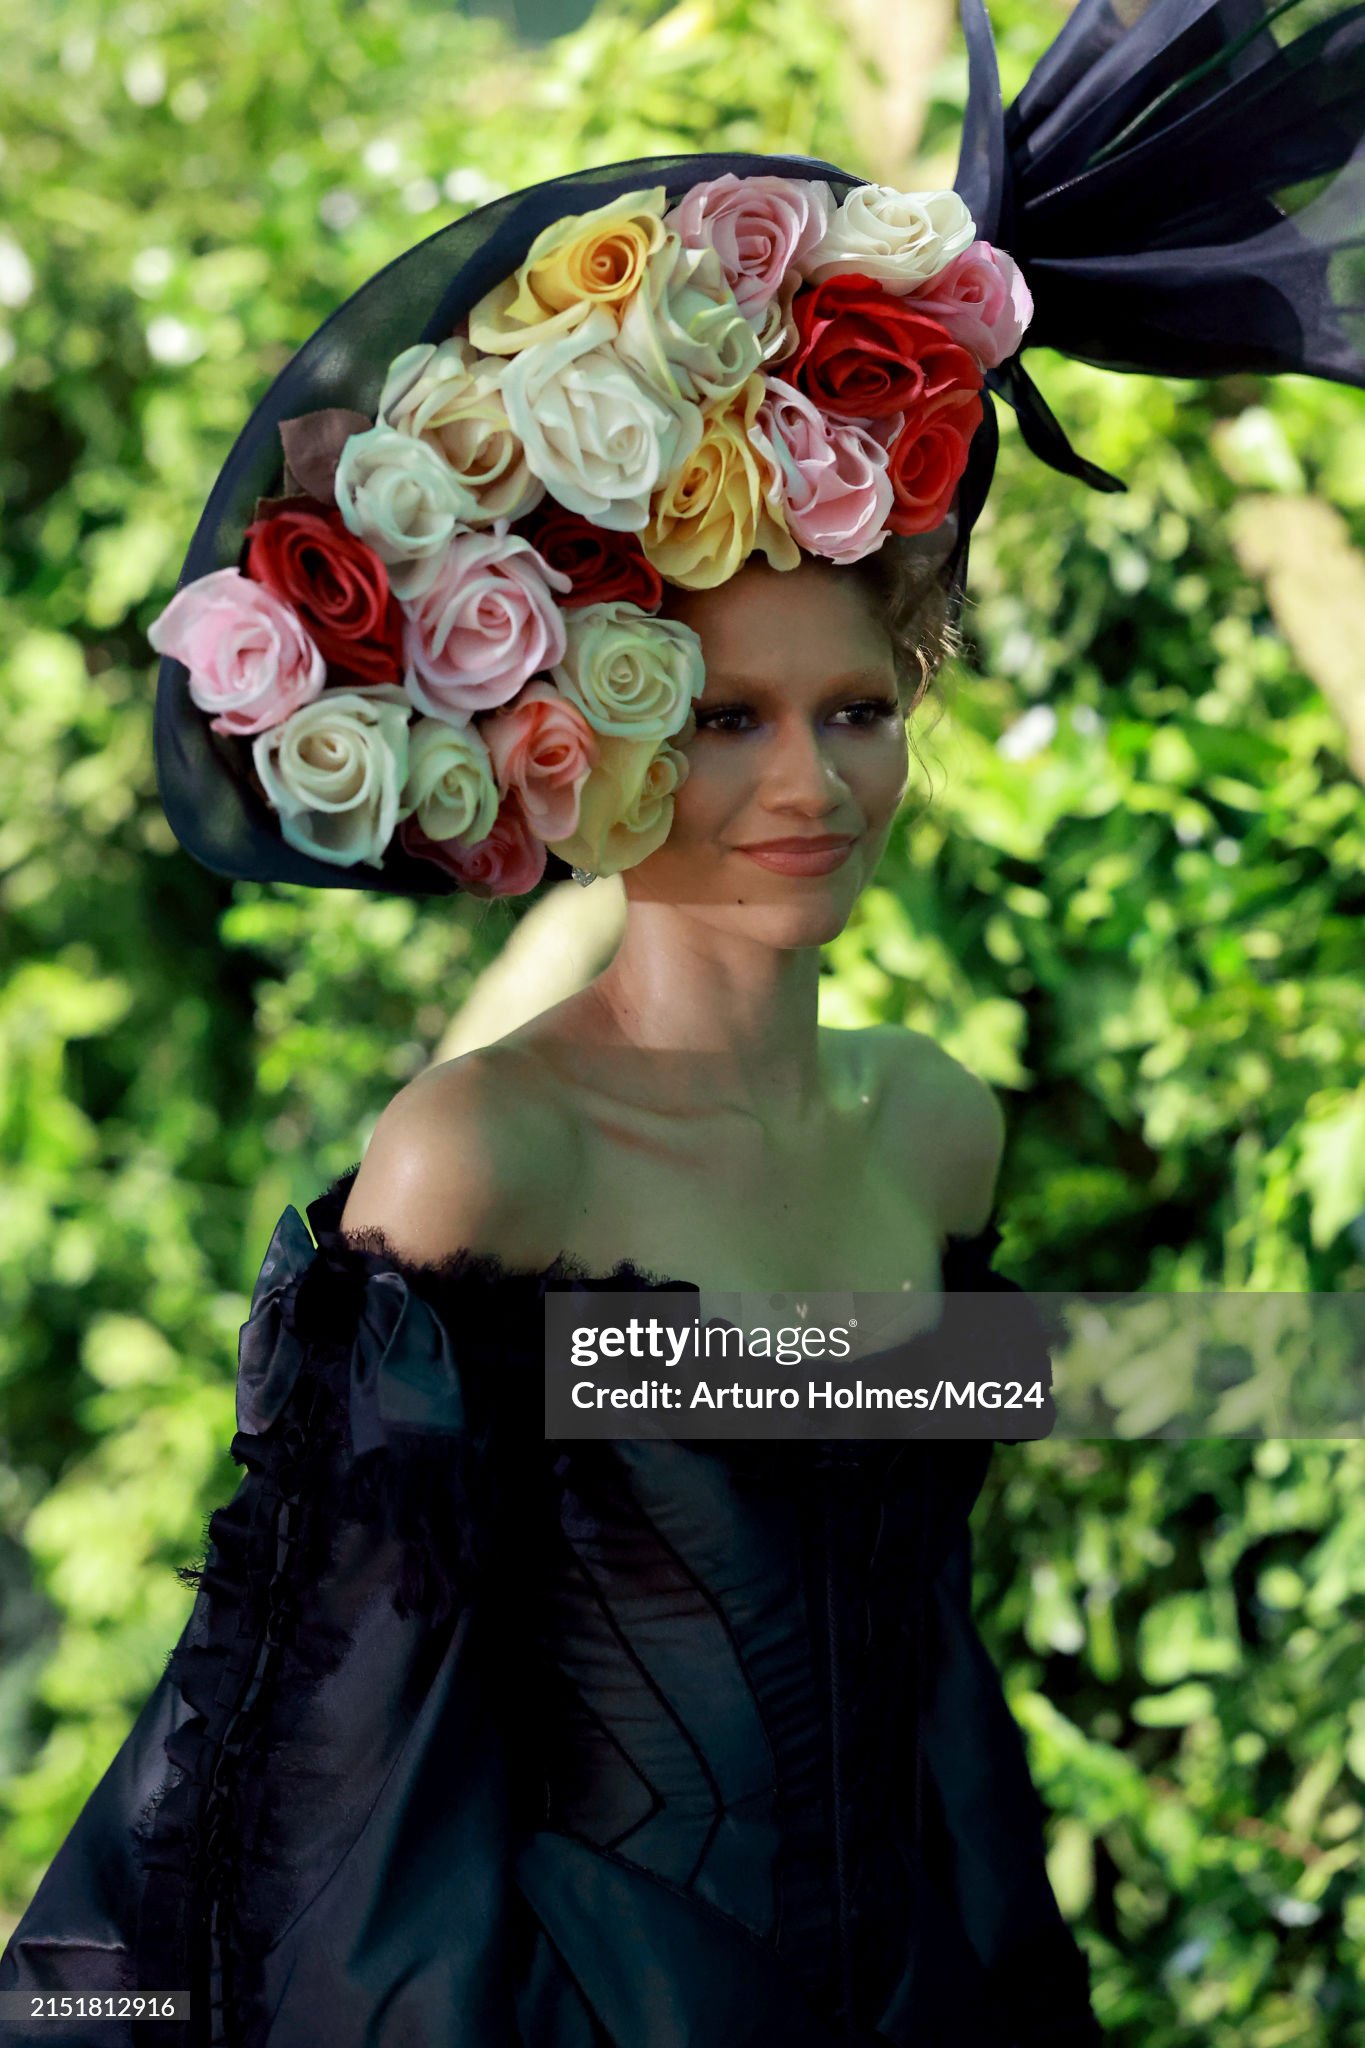 gettyimages-2151812916-2048x2048.jpg